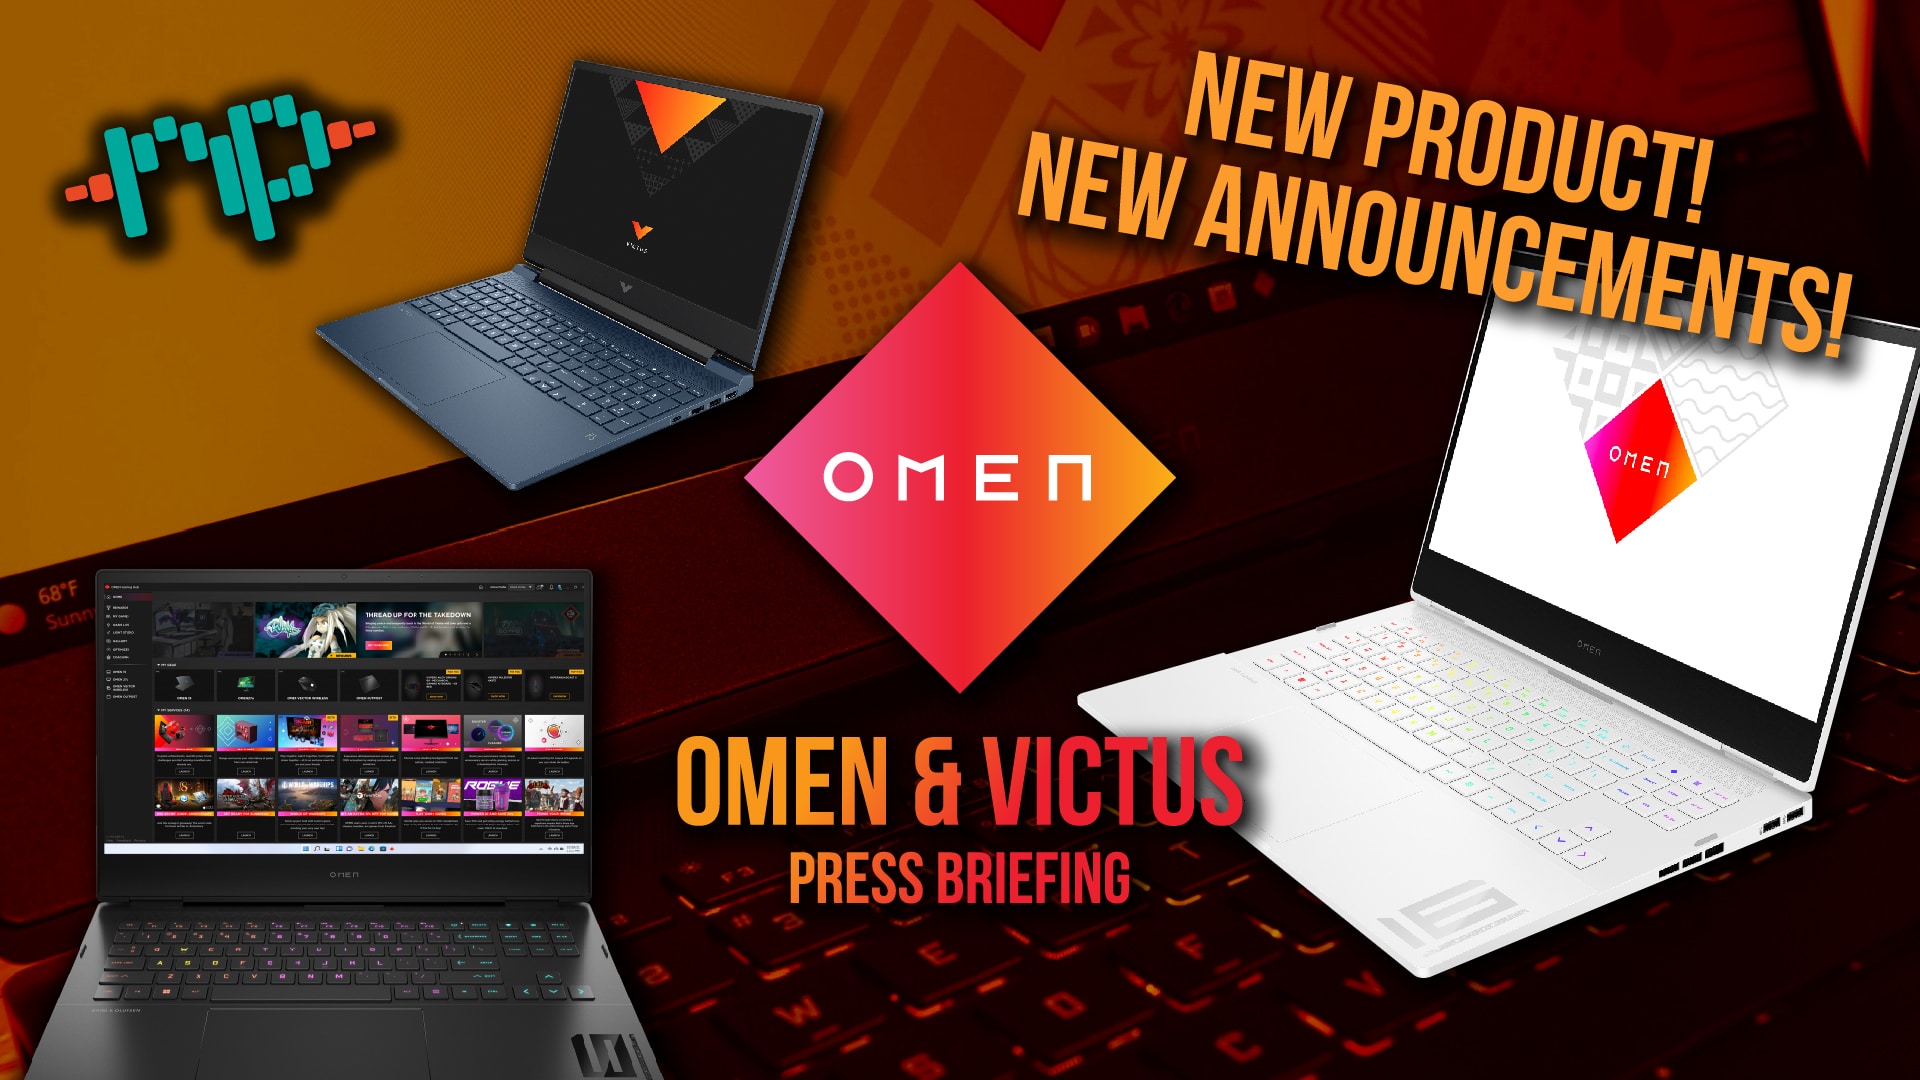 HP Omen, Gaming Hub, Victus Announcements – New Connectivity Features, Twinkly Lights & Airflow